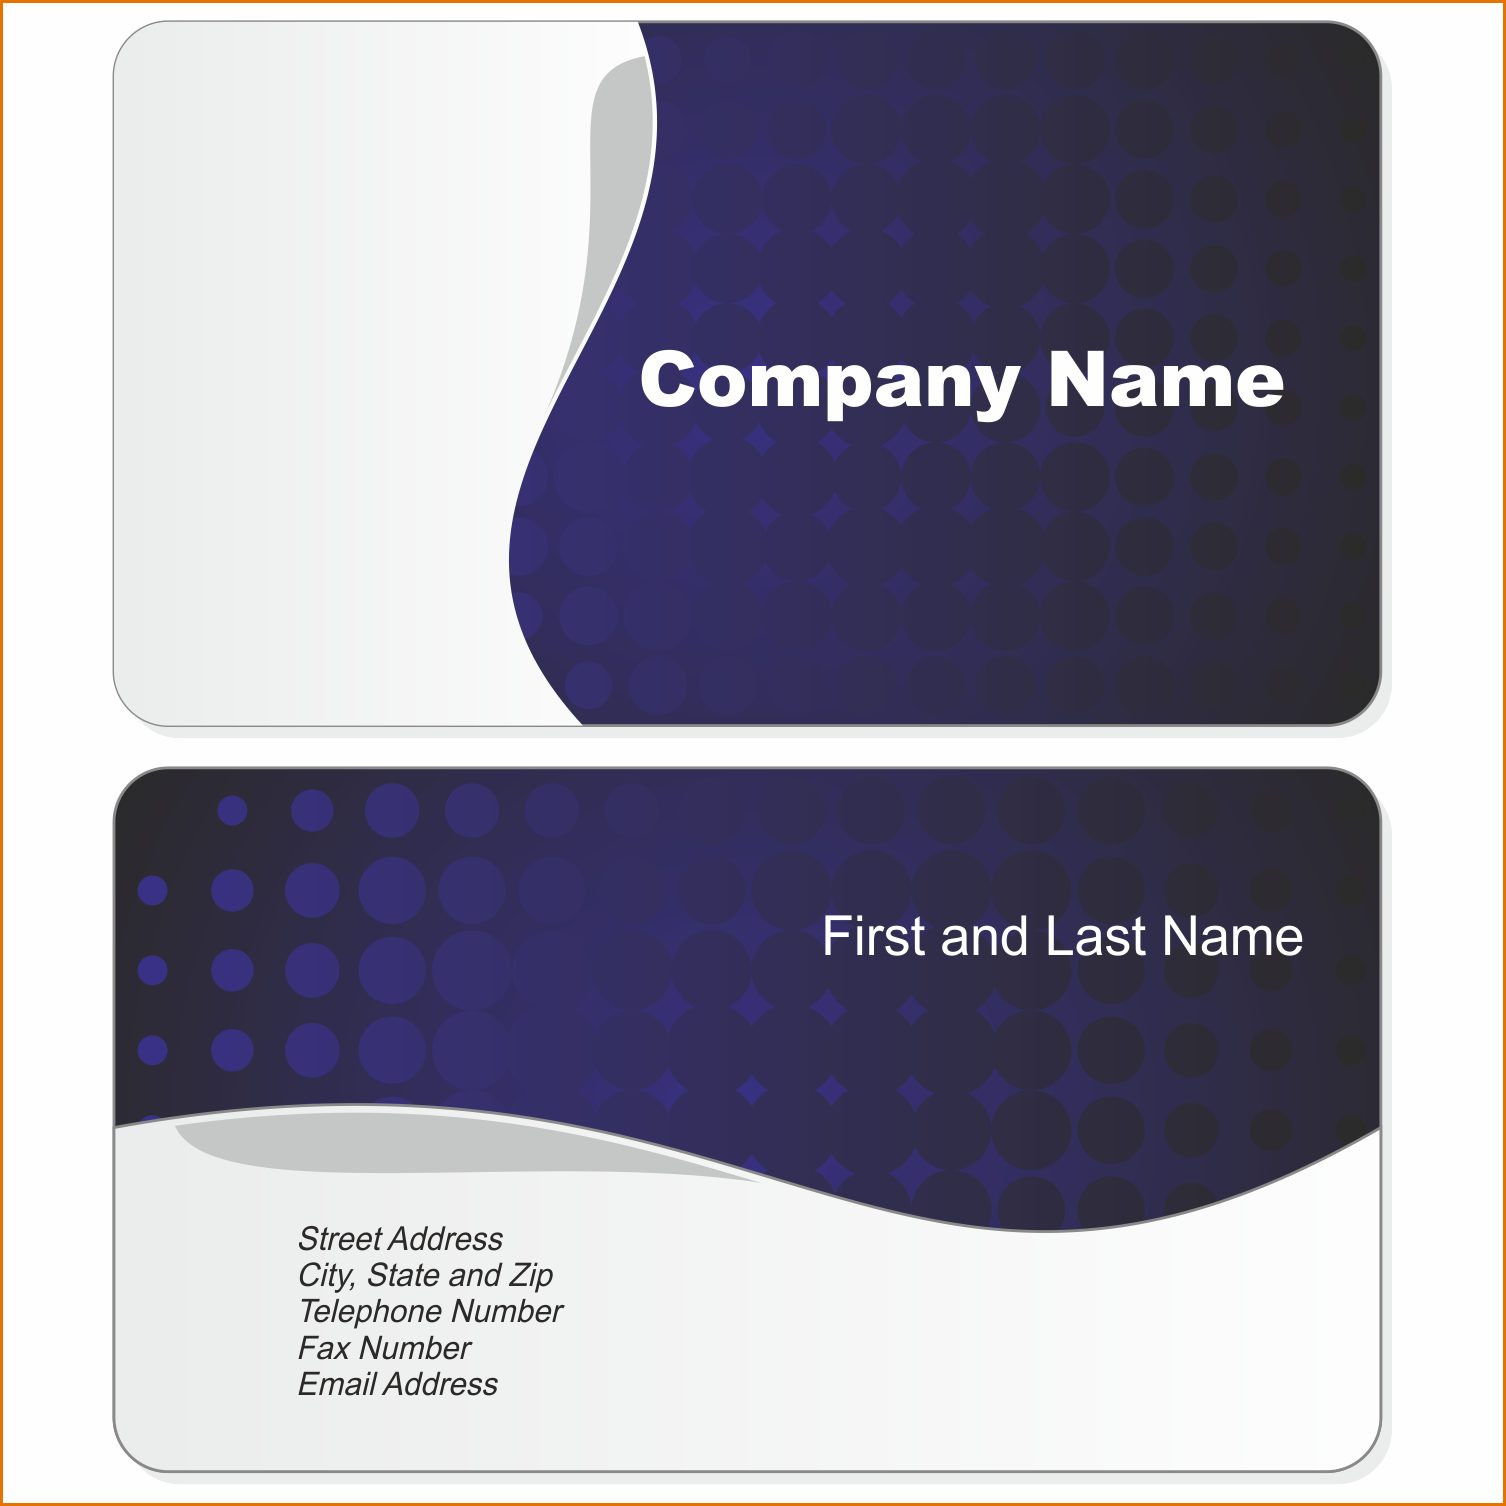 Business Card Word Free Template Canva Beauty Design Of Business Card Template Online Free